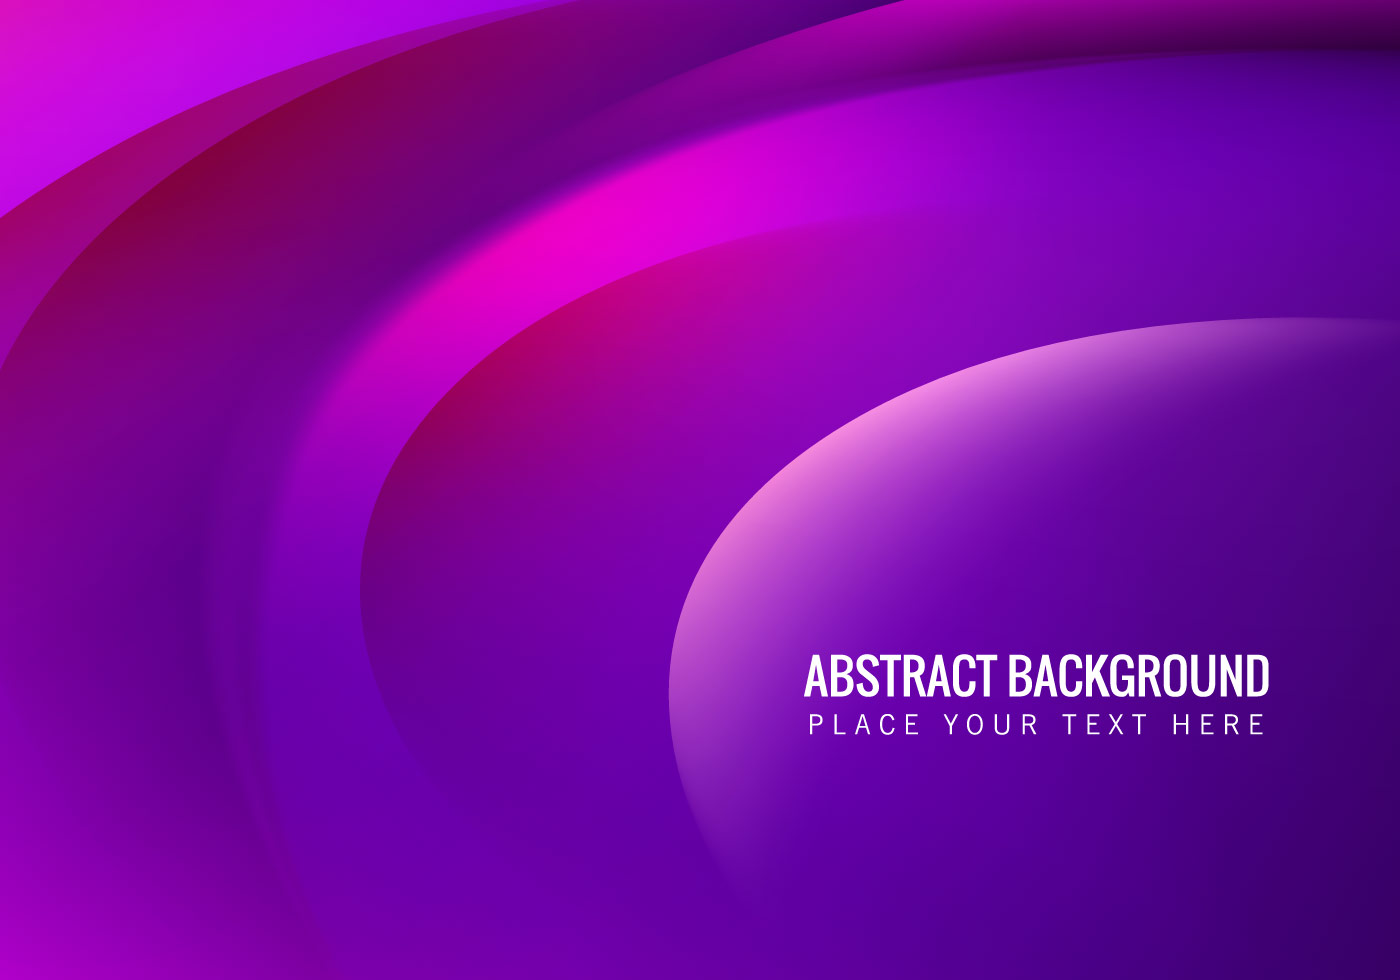 Abstract Purple Background - Download Free Vector Art, Stock Graphics